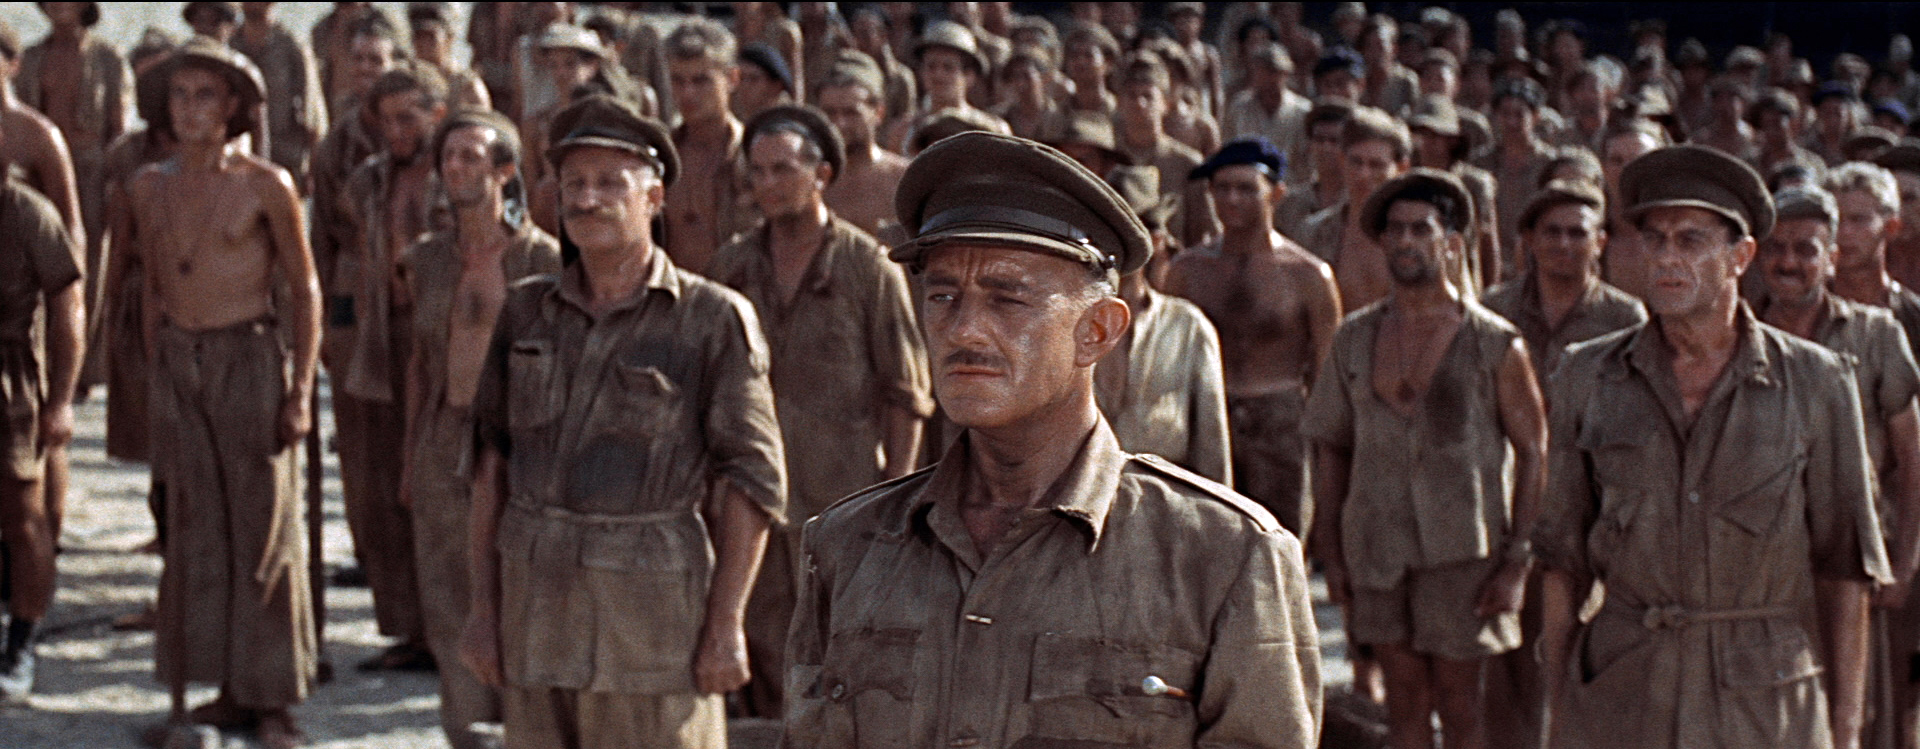 Sir Aec Guiness in “The Bridge on the River Kwai”